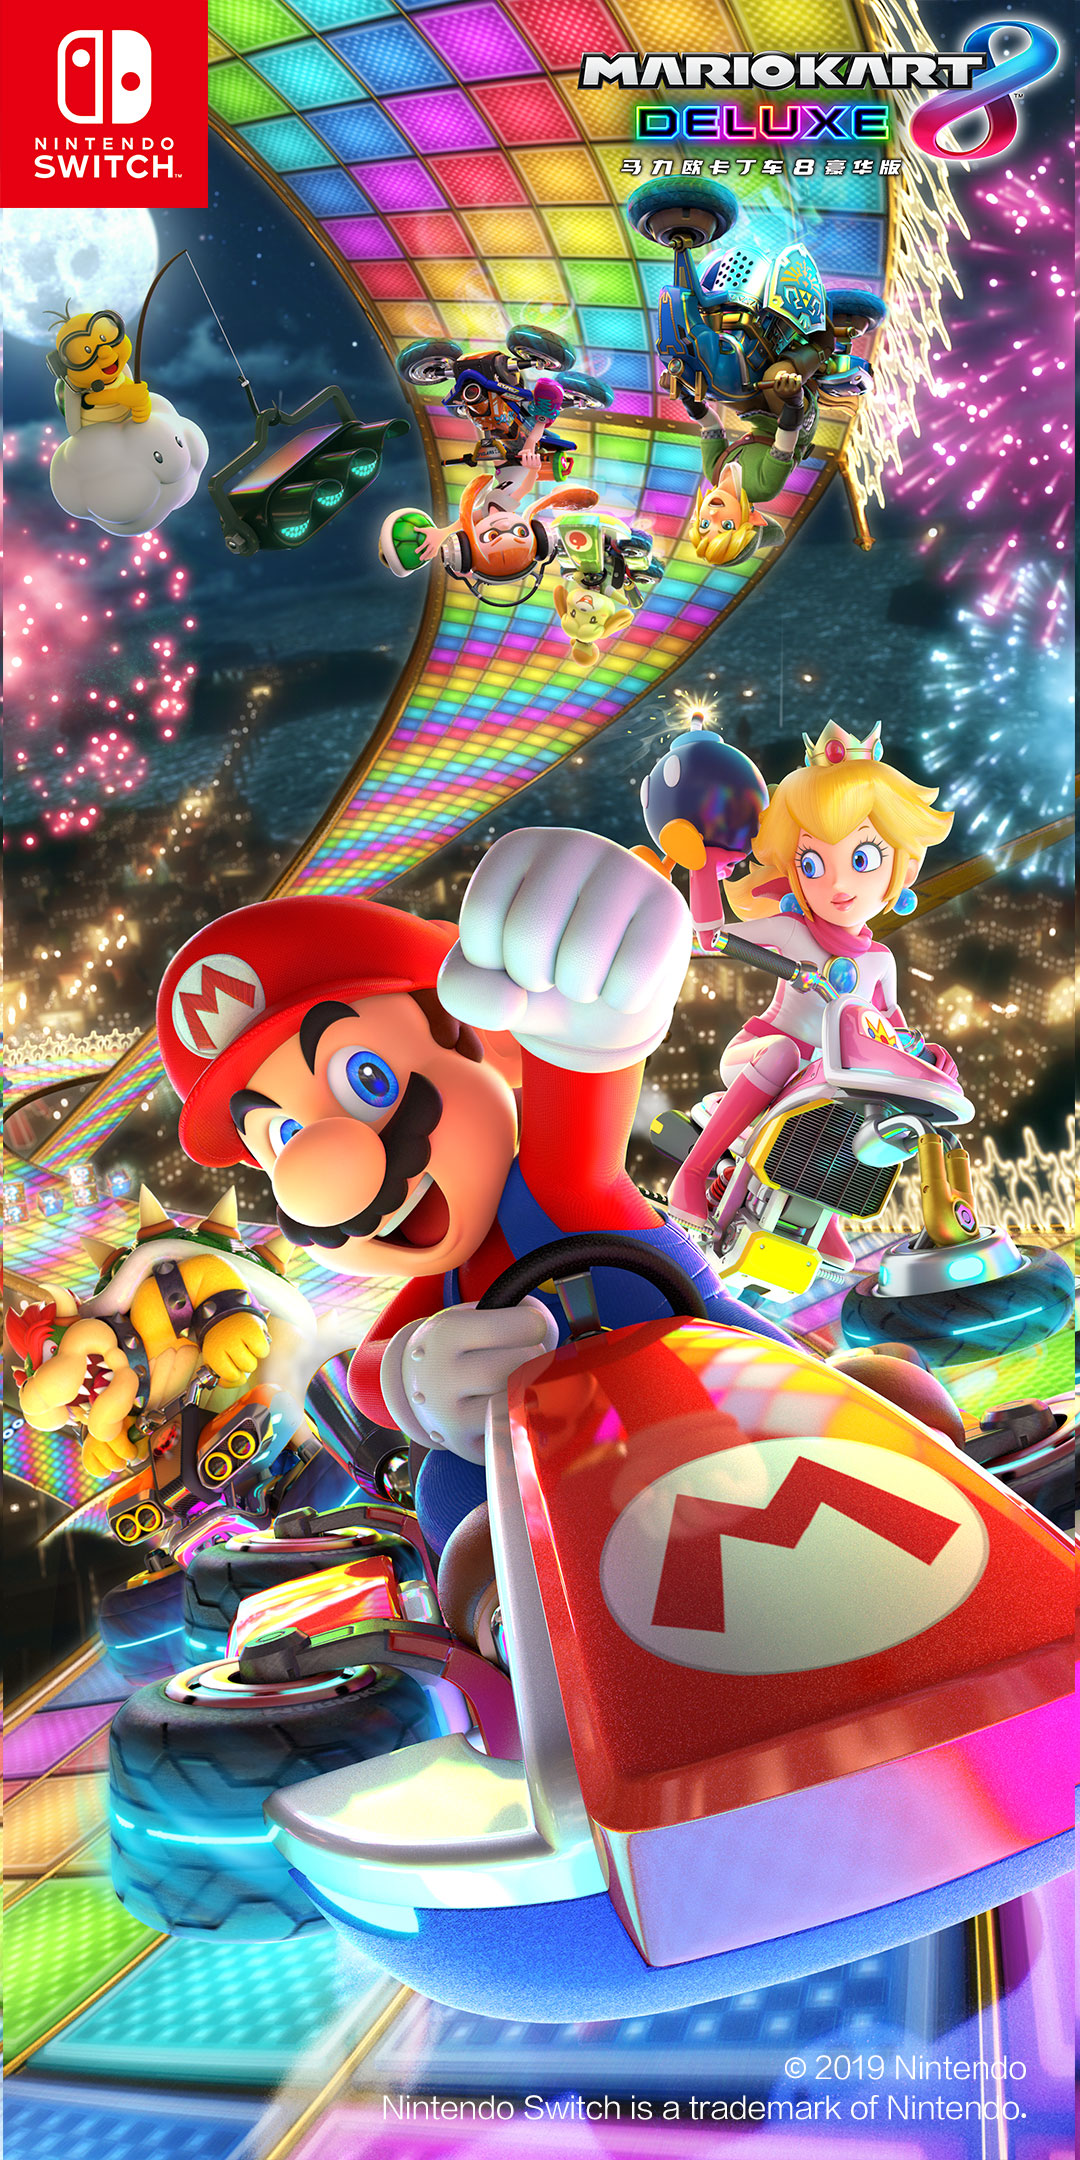 Chinese Nintendo Nintendo Switch Wallpaper From Tencent Nintendo Switch Wechat Account Link To Original Files In Comments T Co Ict9m9ifh9 Twitter